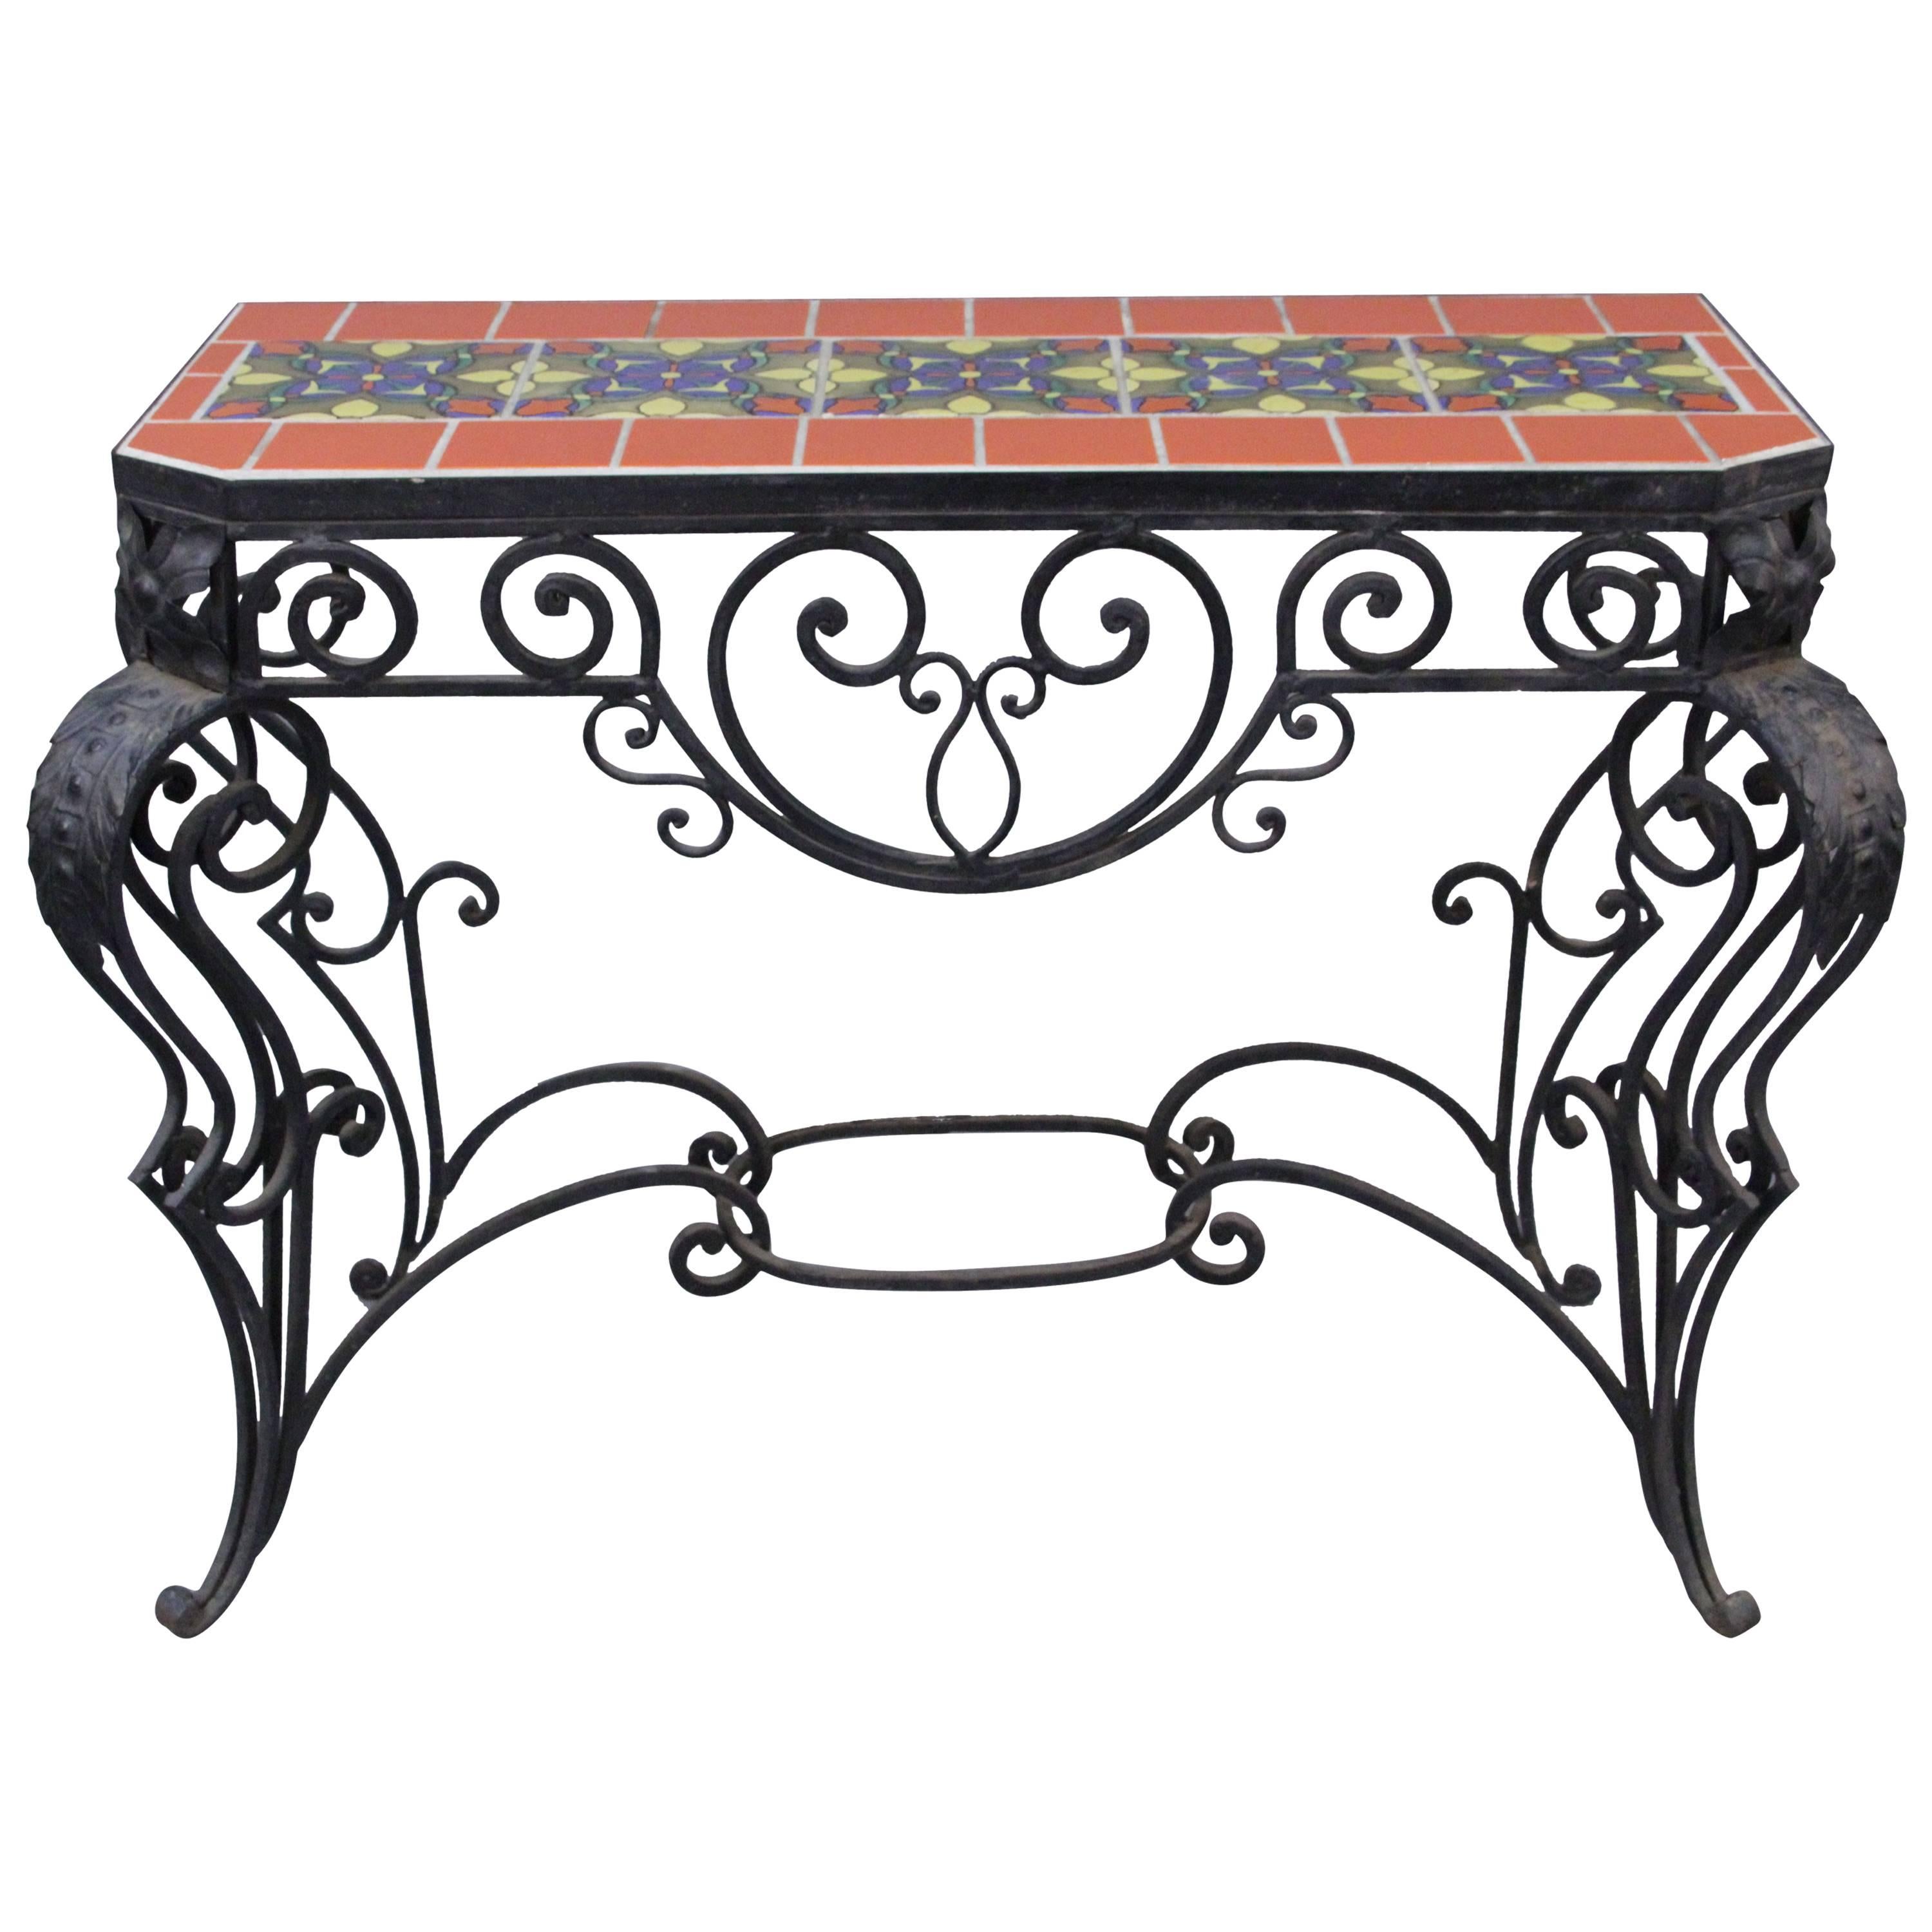 1920s Wrought Iron Console Table with Malibu California Tiles